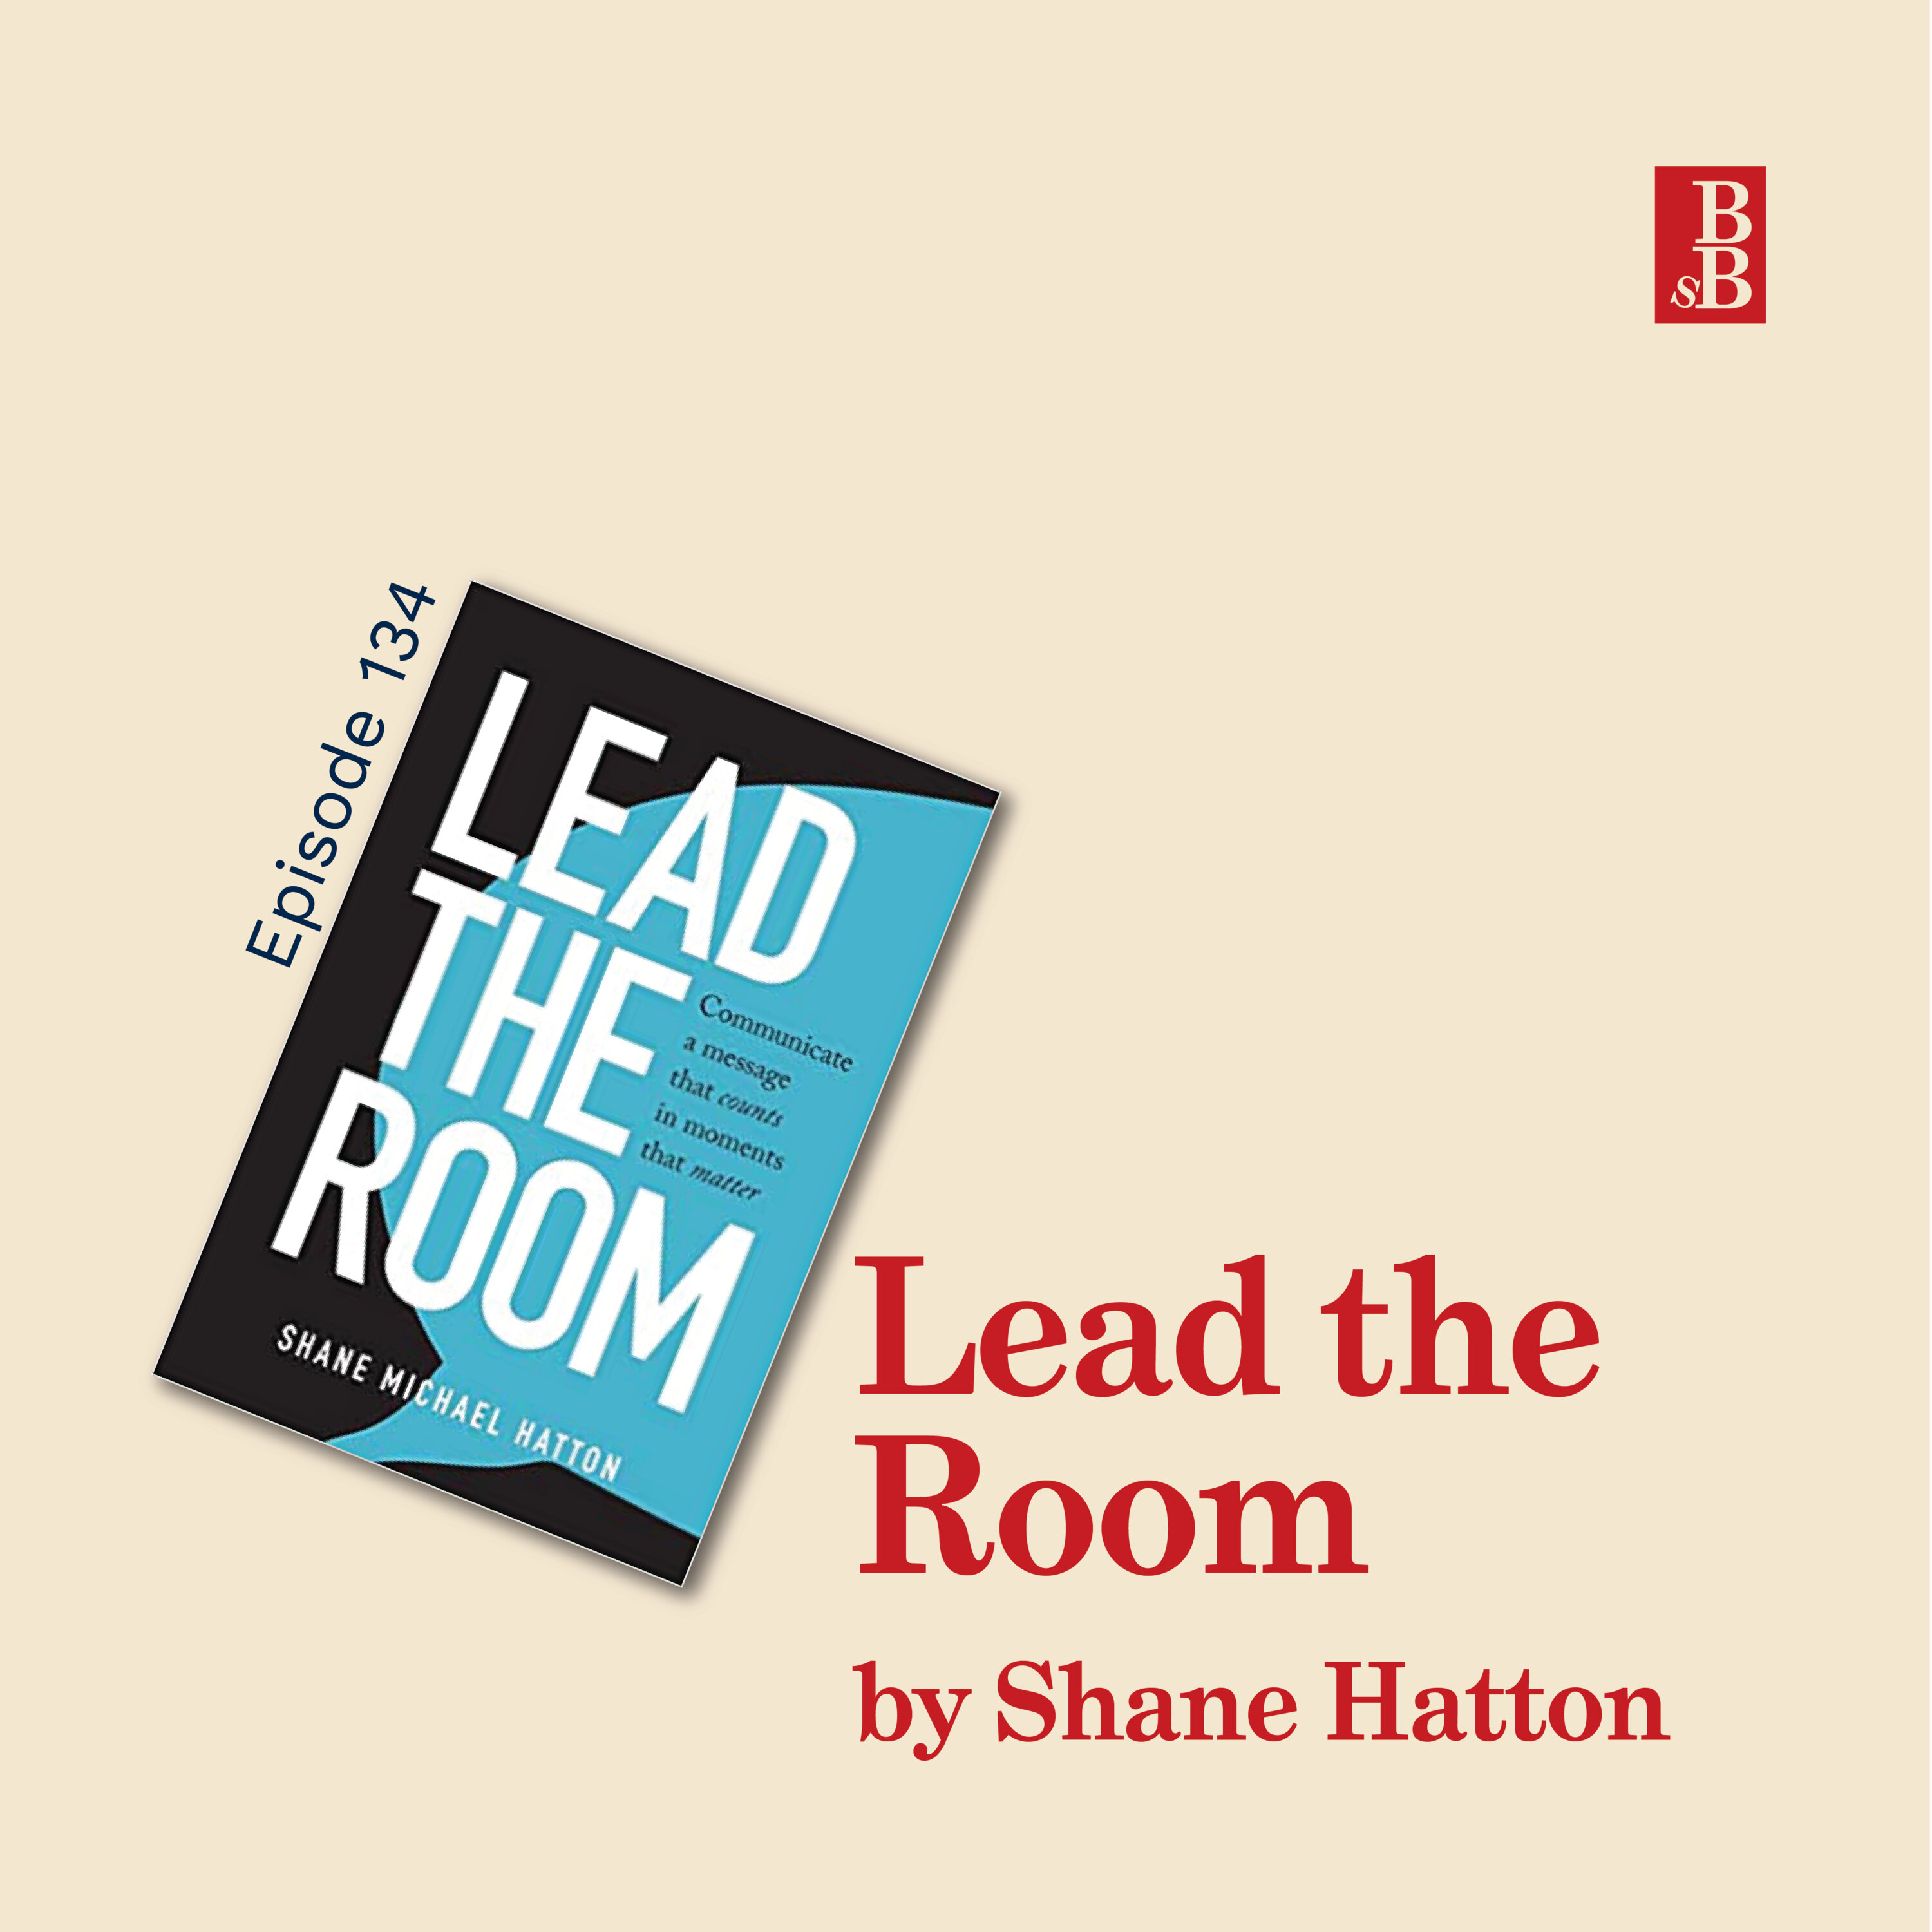 Lead the Room by Shane Hatton: the real secrets behind great presentation skills